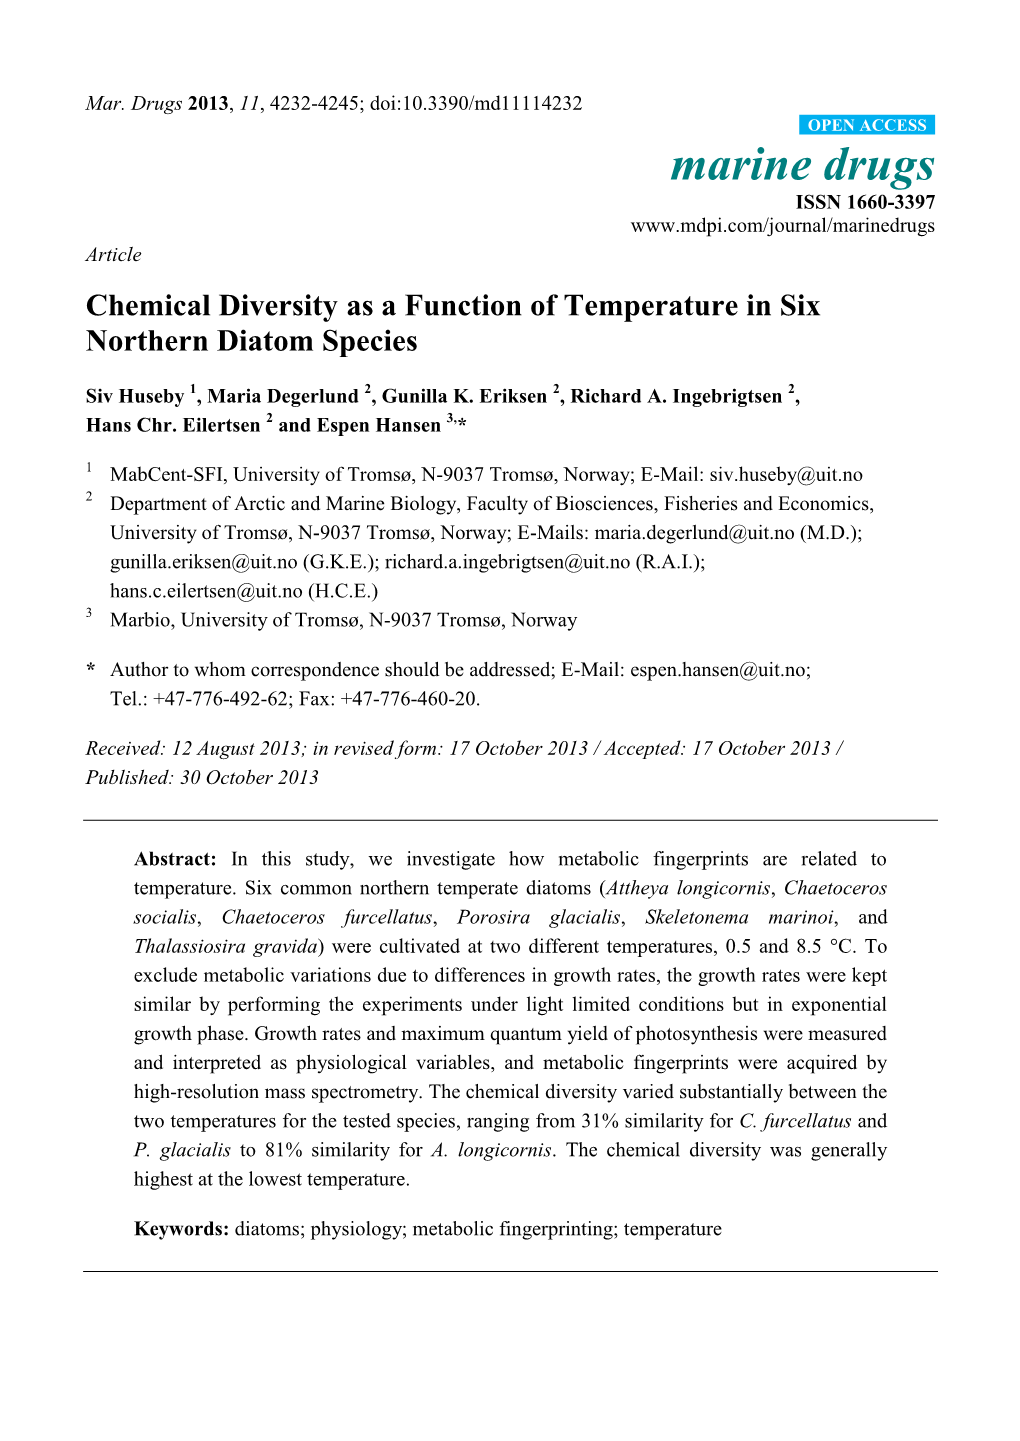 Chemical Diversity As a Function of Temperature in Six Northern Diatom Species